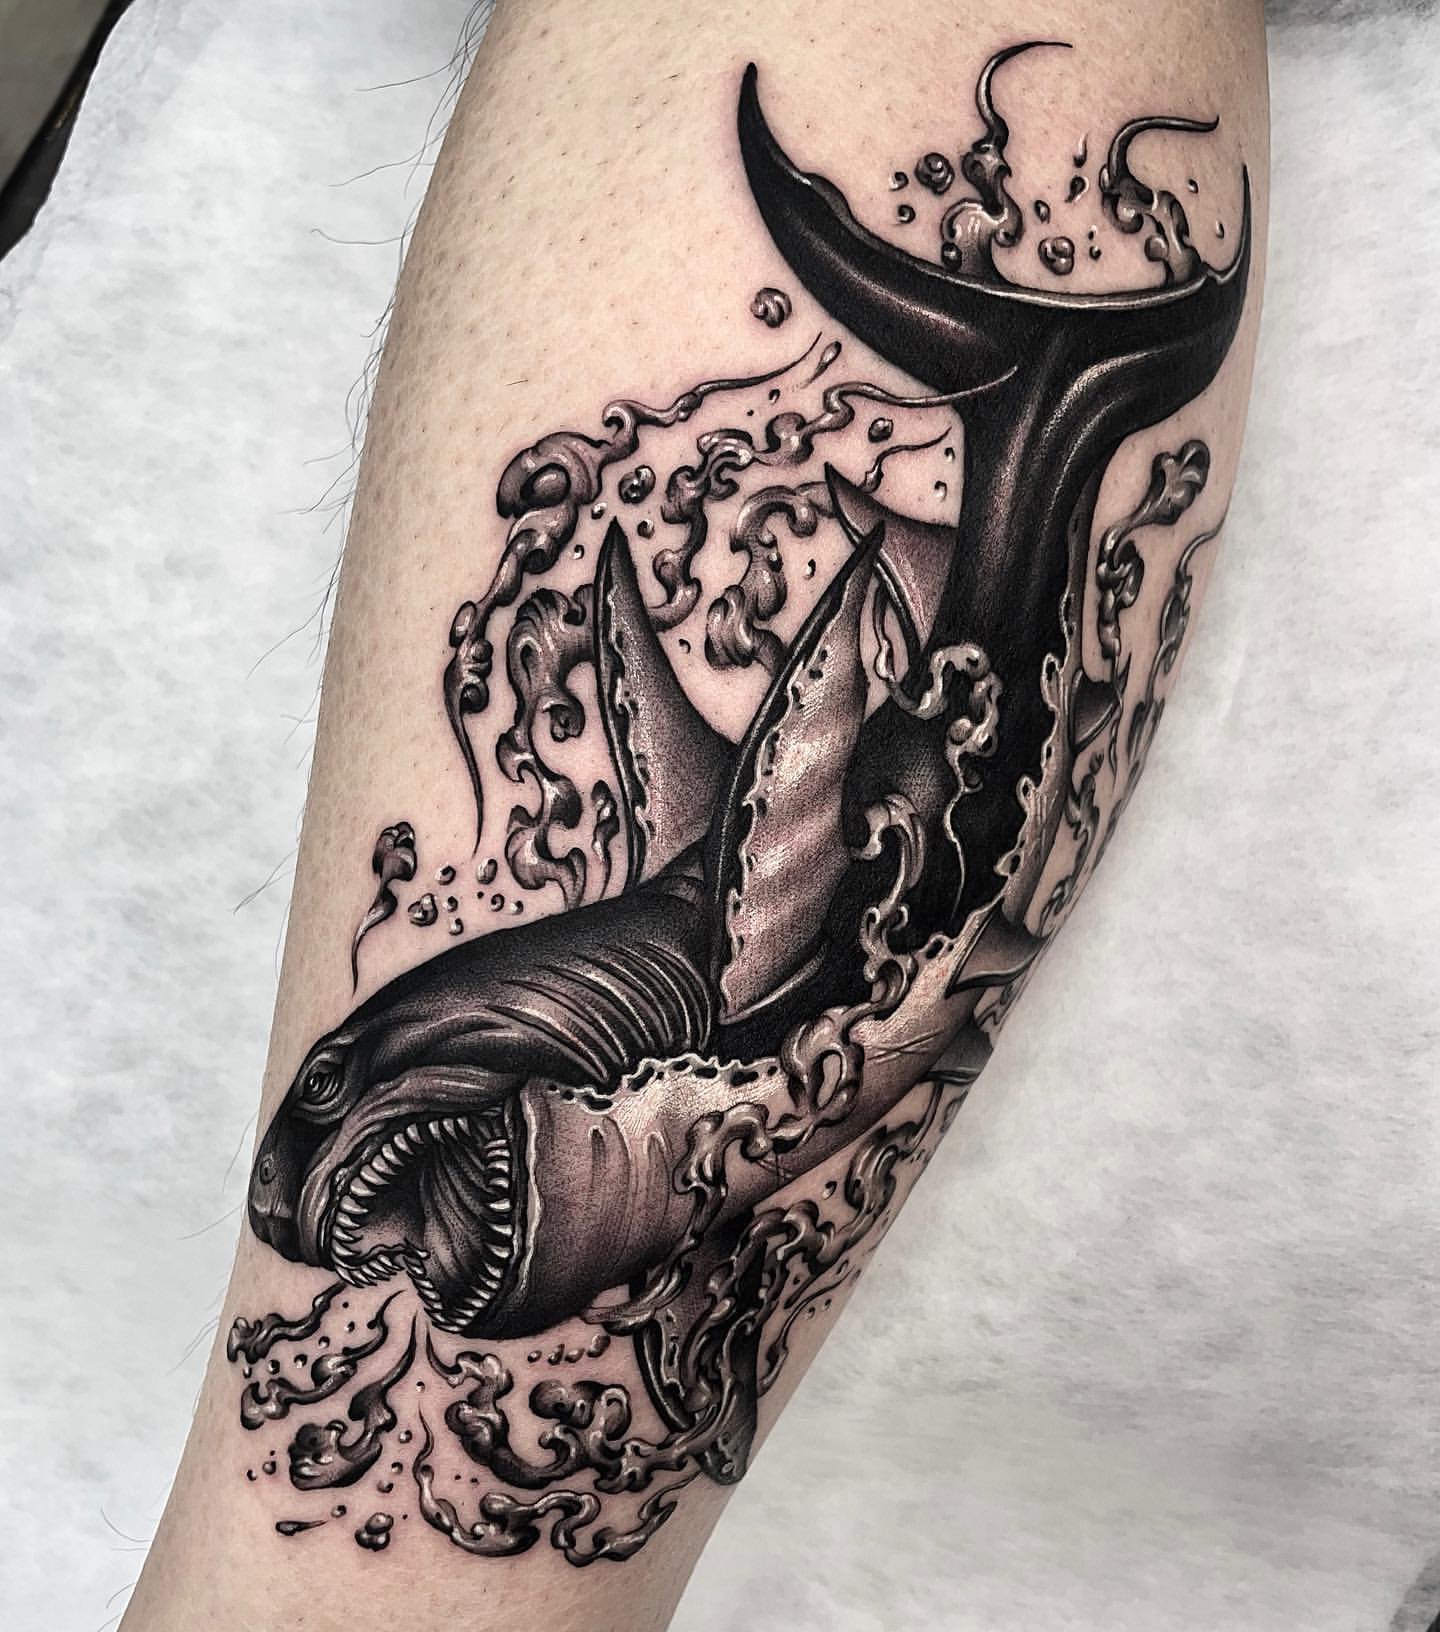 101 Amazing Shark Tattoo Ideas That Will Blow Your Mind! | Shark tattoos,  Tattoos, Traditional shark tattoo